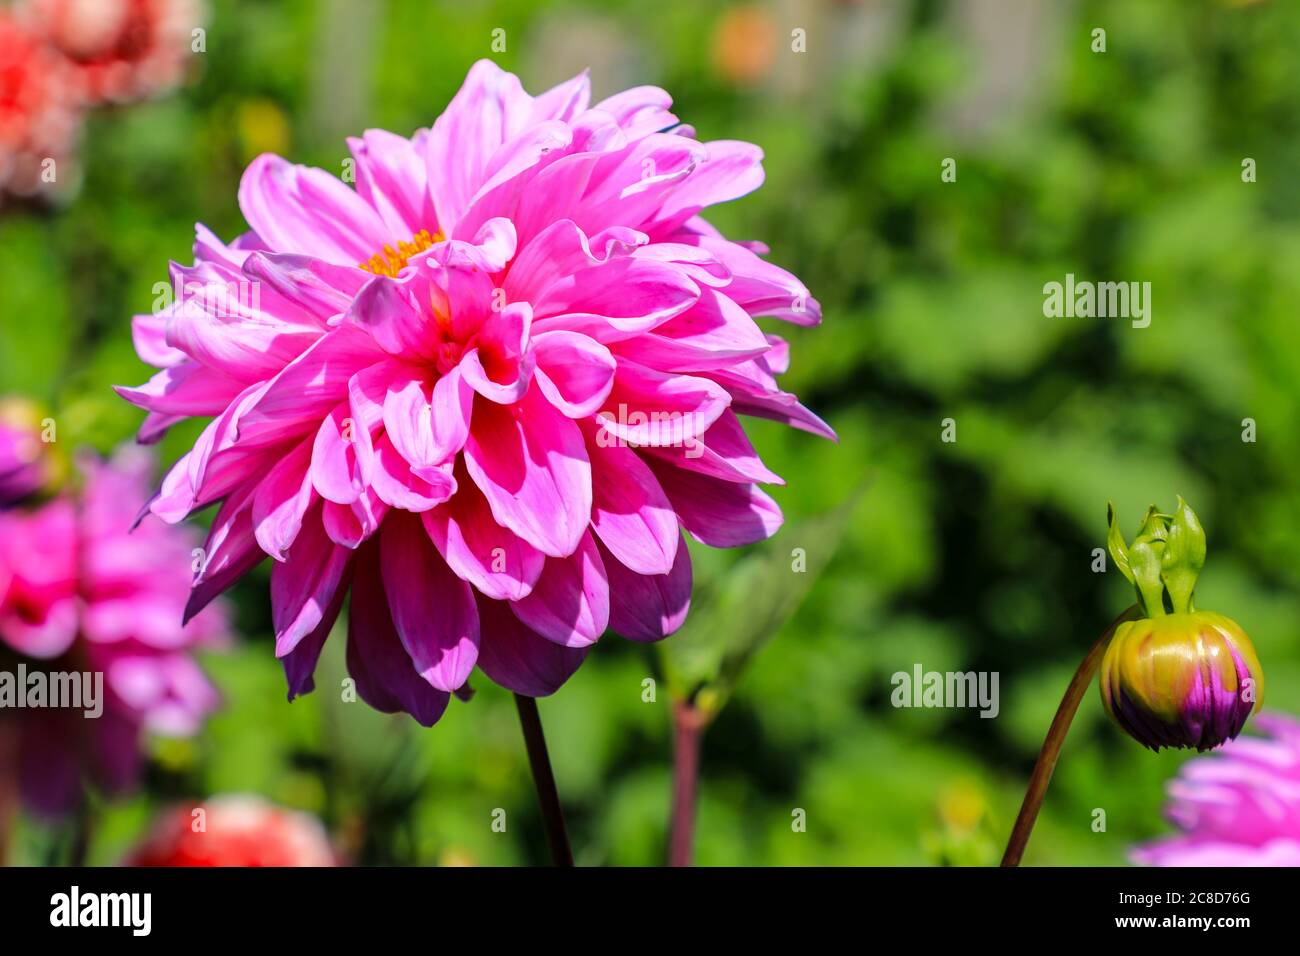 Close up shot of a purple pink flower head of a Dahlia named 'Worton Superb' at the National Dahlia Collection, Penzance, Cornwall, England Stock Photo